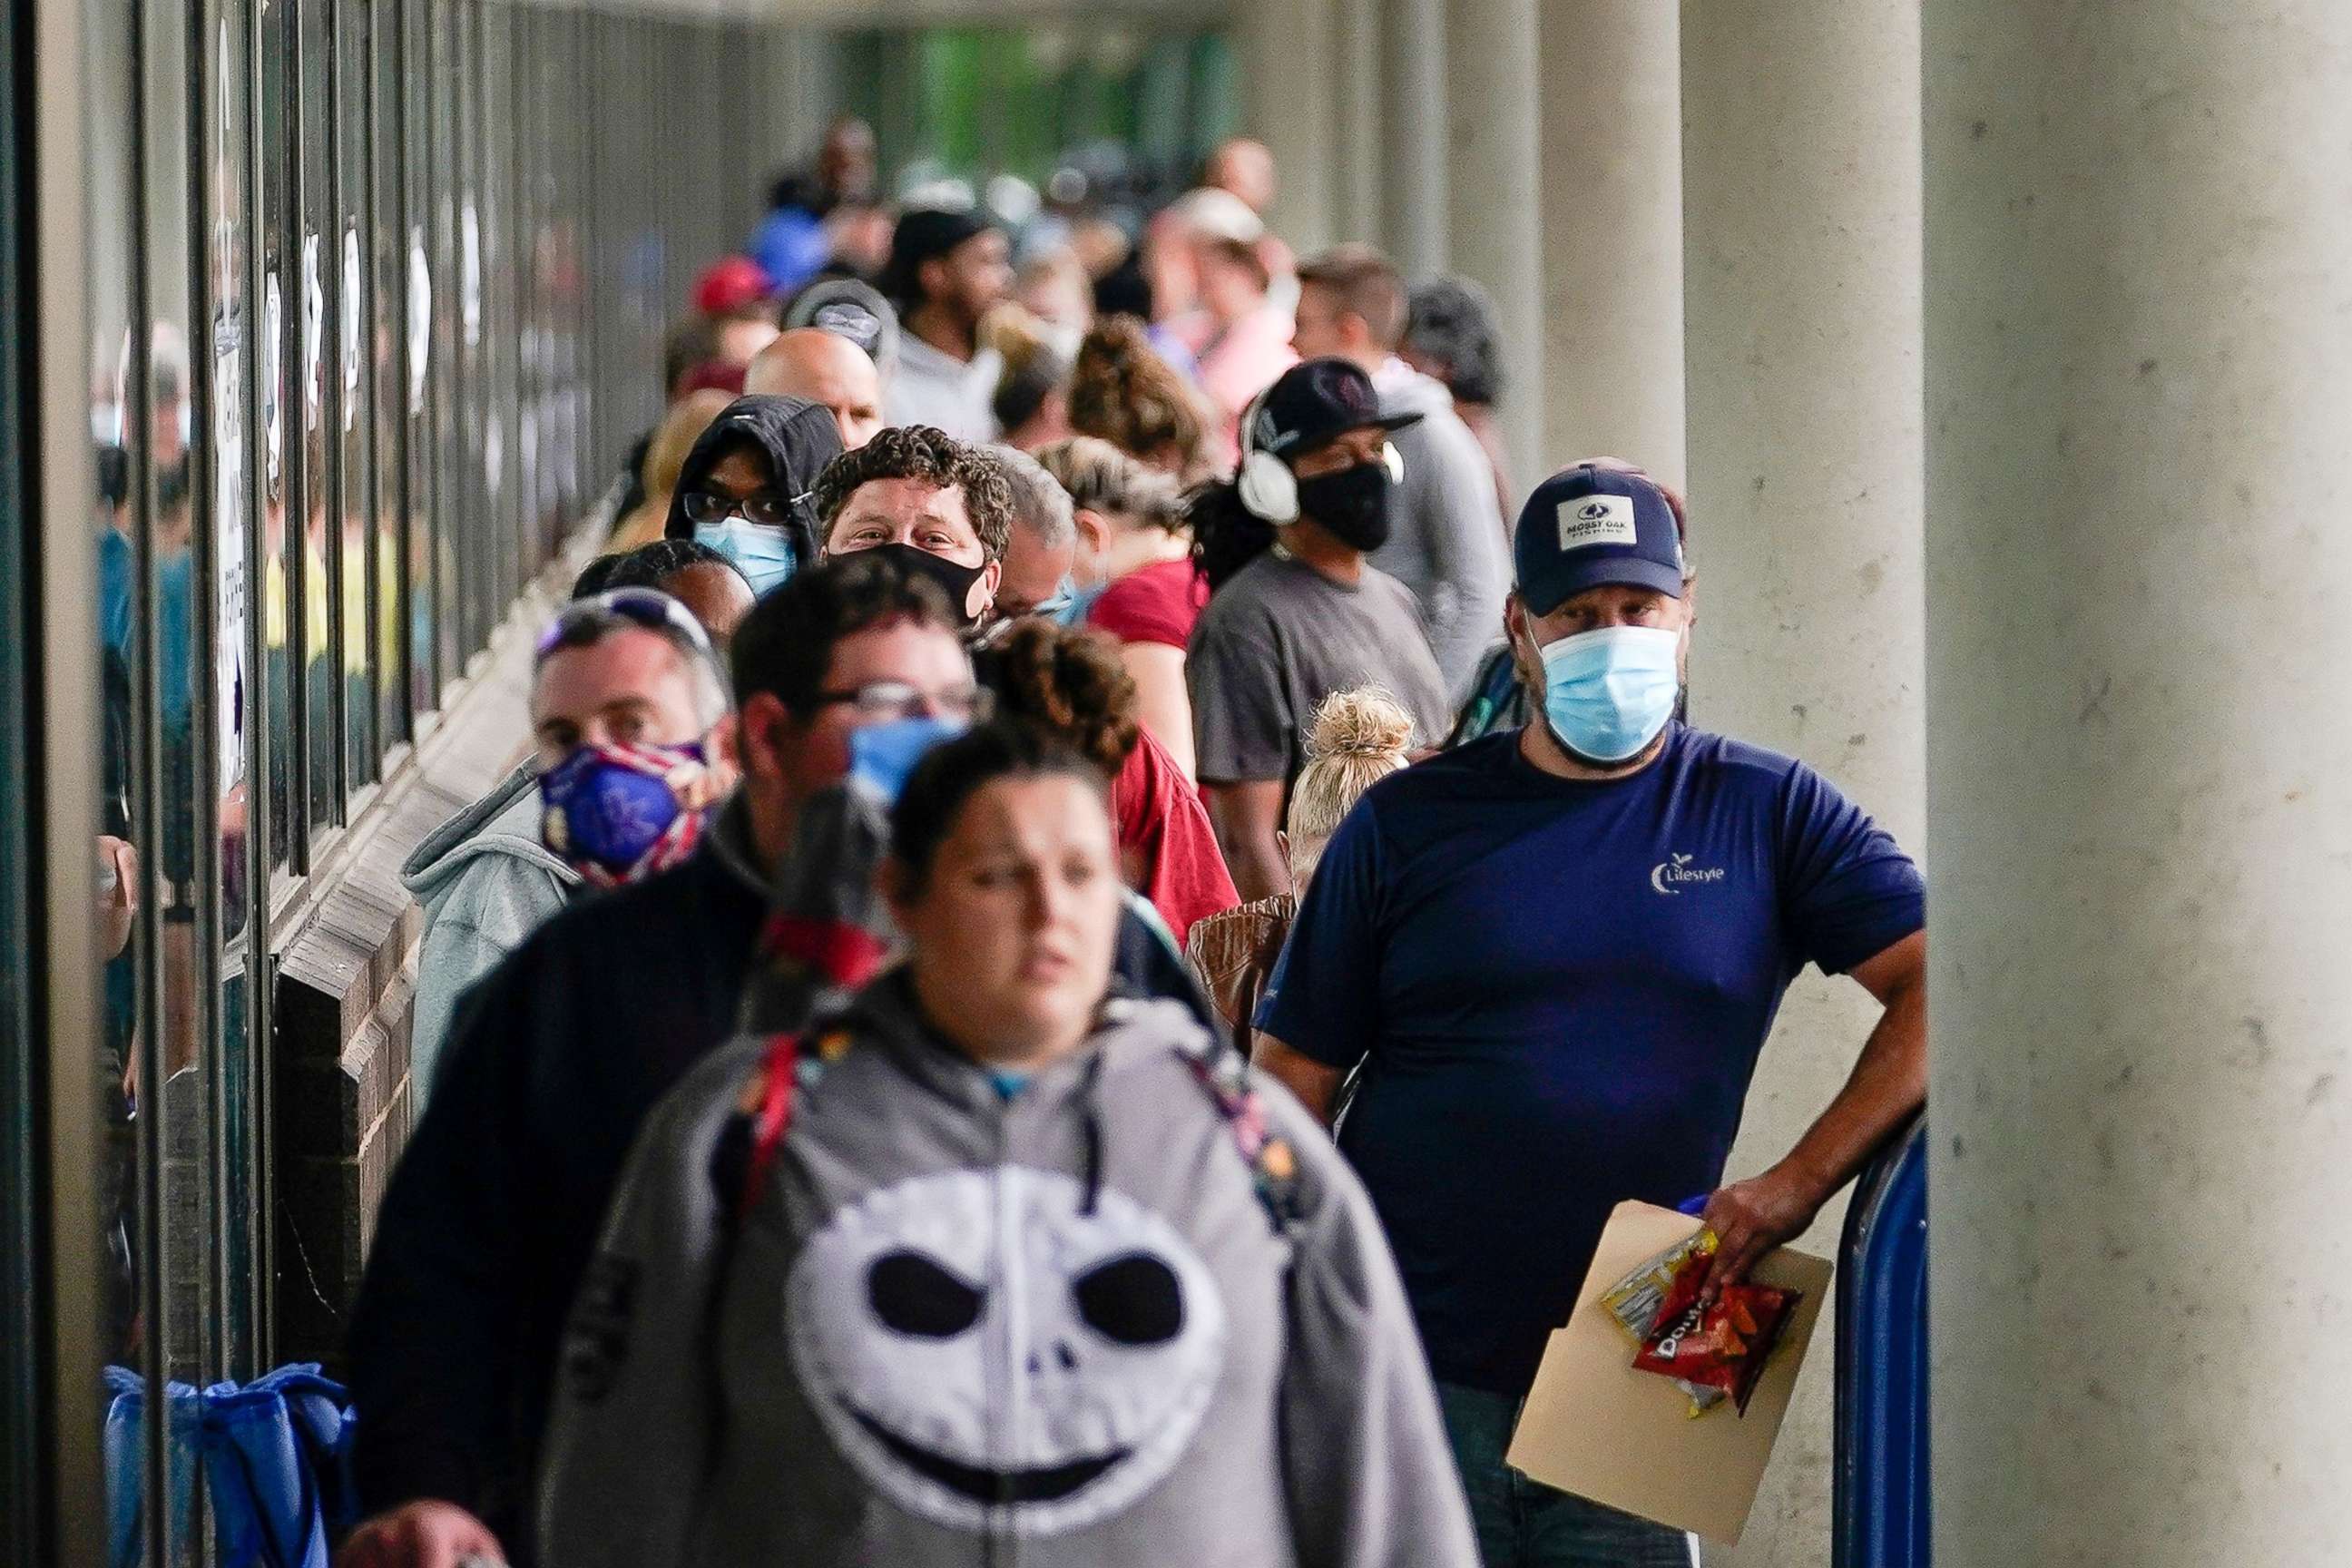 PHOTO: Hundreds of people line up outside a Kentucky Career Center hoping to find assistance with their unemployment claim in Frankfort, Kentucky, June 18, 2020.